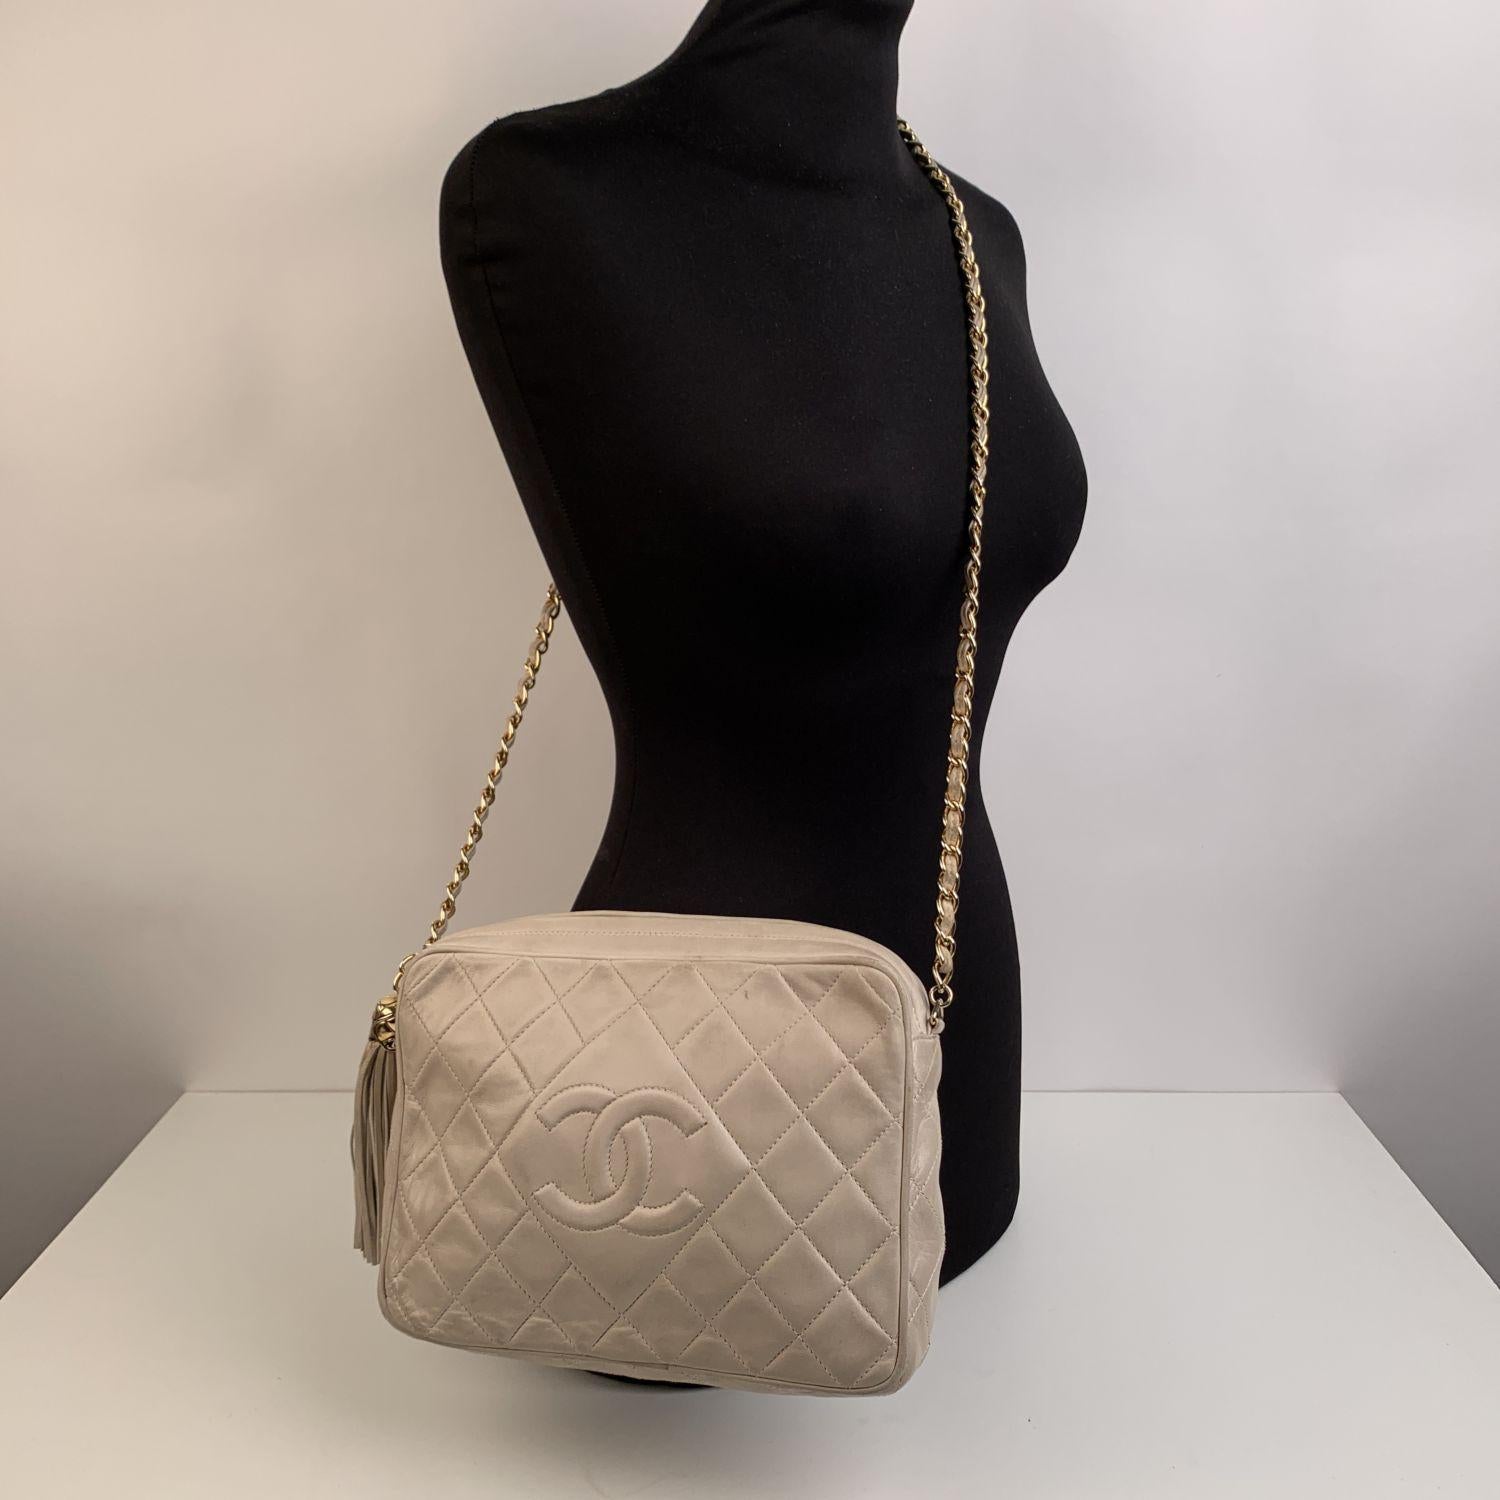 Vintage Chanel Classic Camera bag with CC - CHANEL logo front stitching . Period/Era: 1990s. Ivory quilted lambskin leather. Upper zip closure. Chanel iconic interwoven chain. Tassel zipper pull . Lined in beige lambskin. 1 side zip pocket inside.